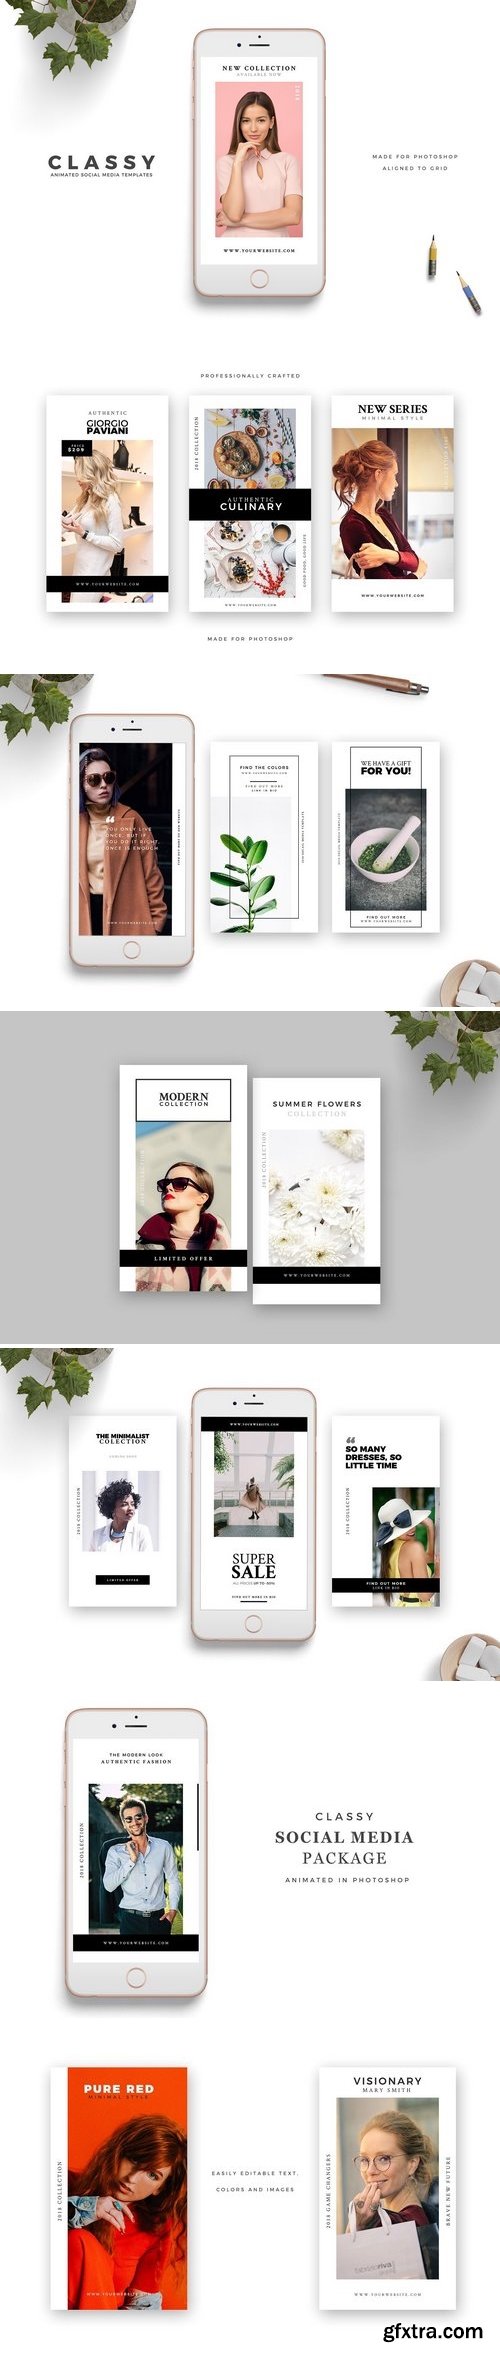 CM - Animated Templates for Instagram 3150773